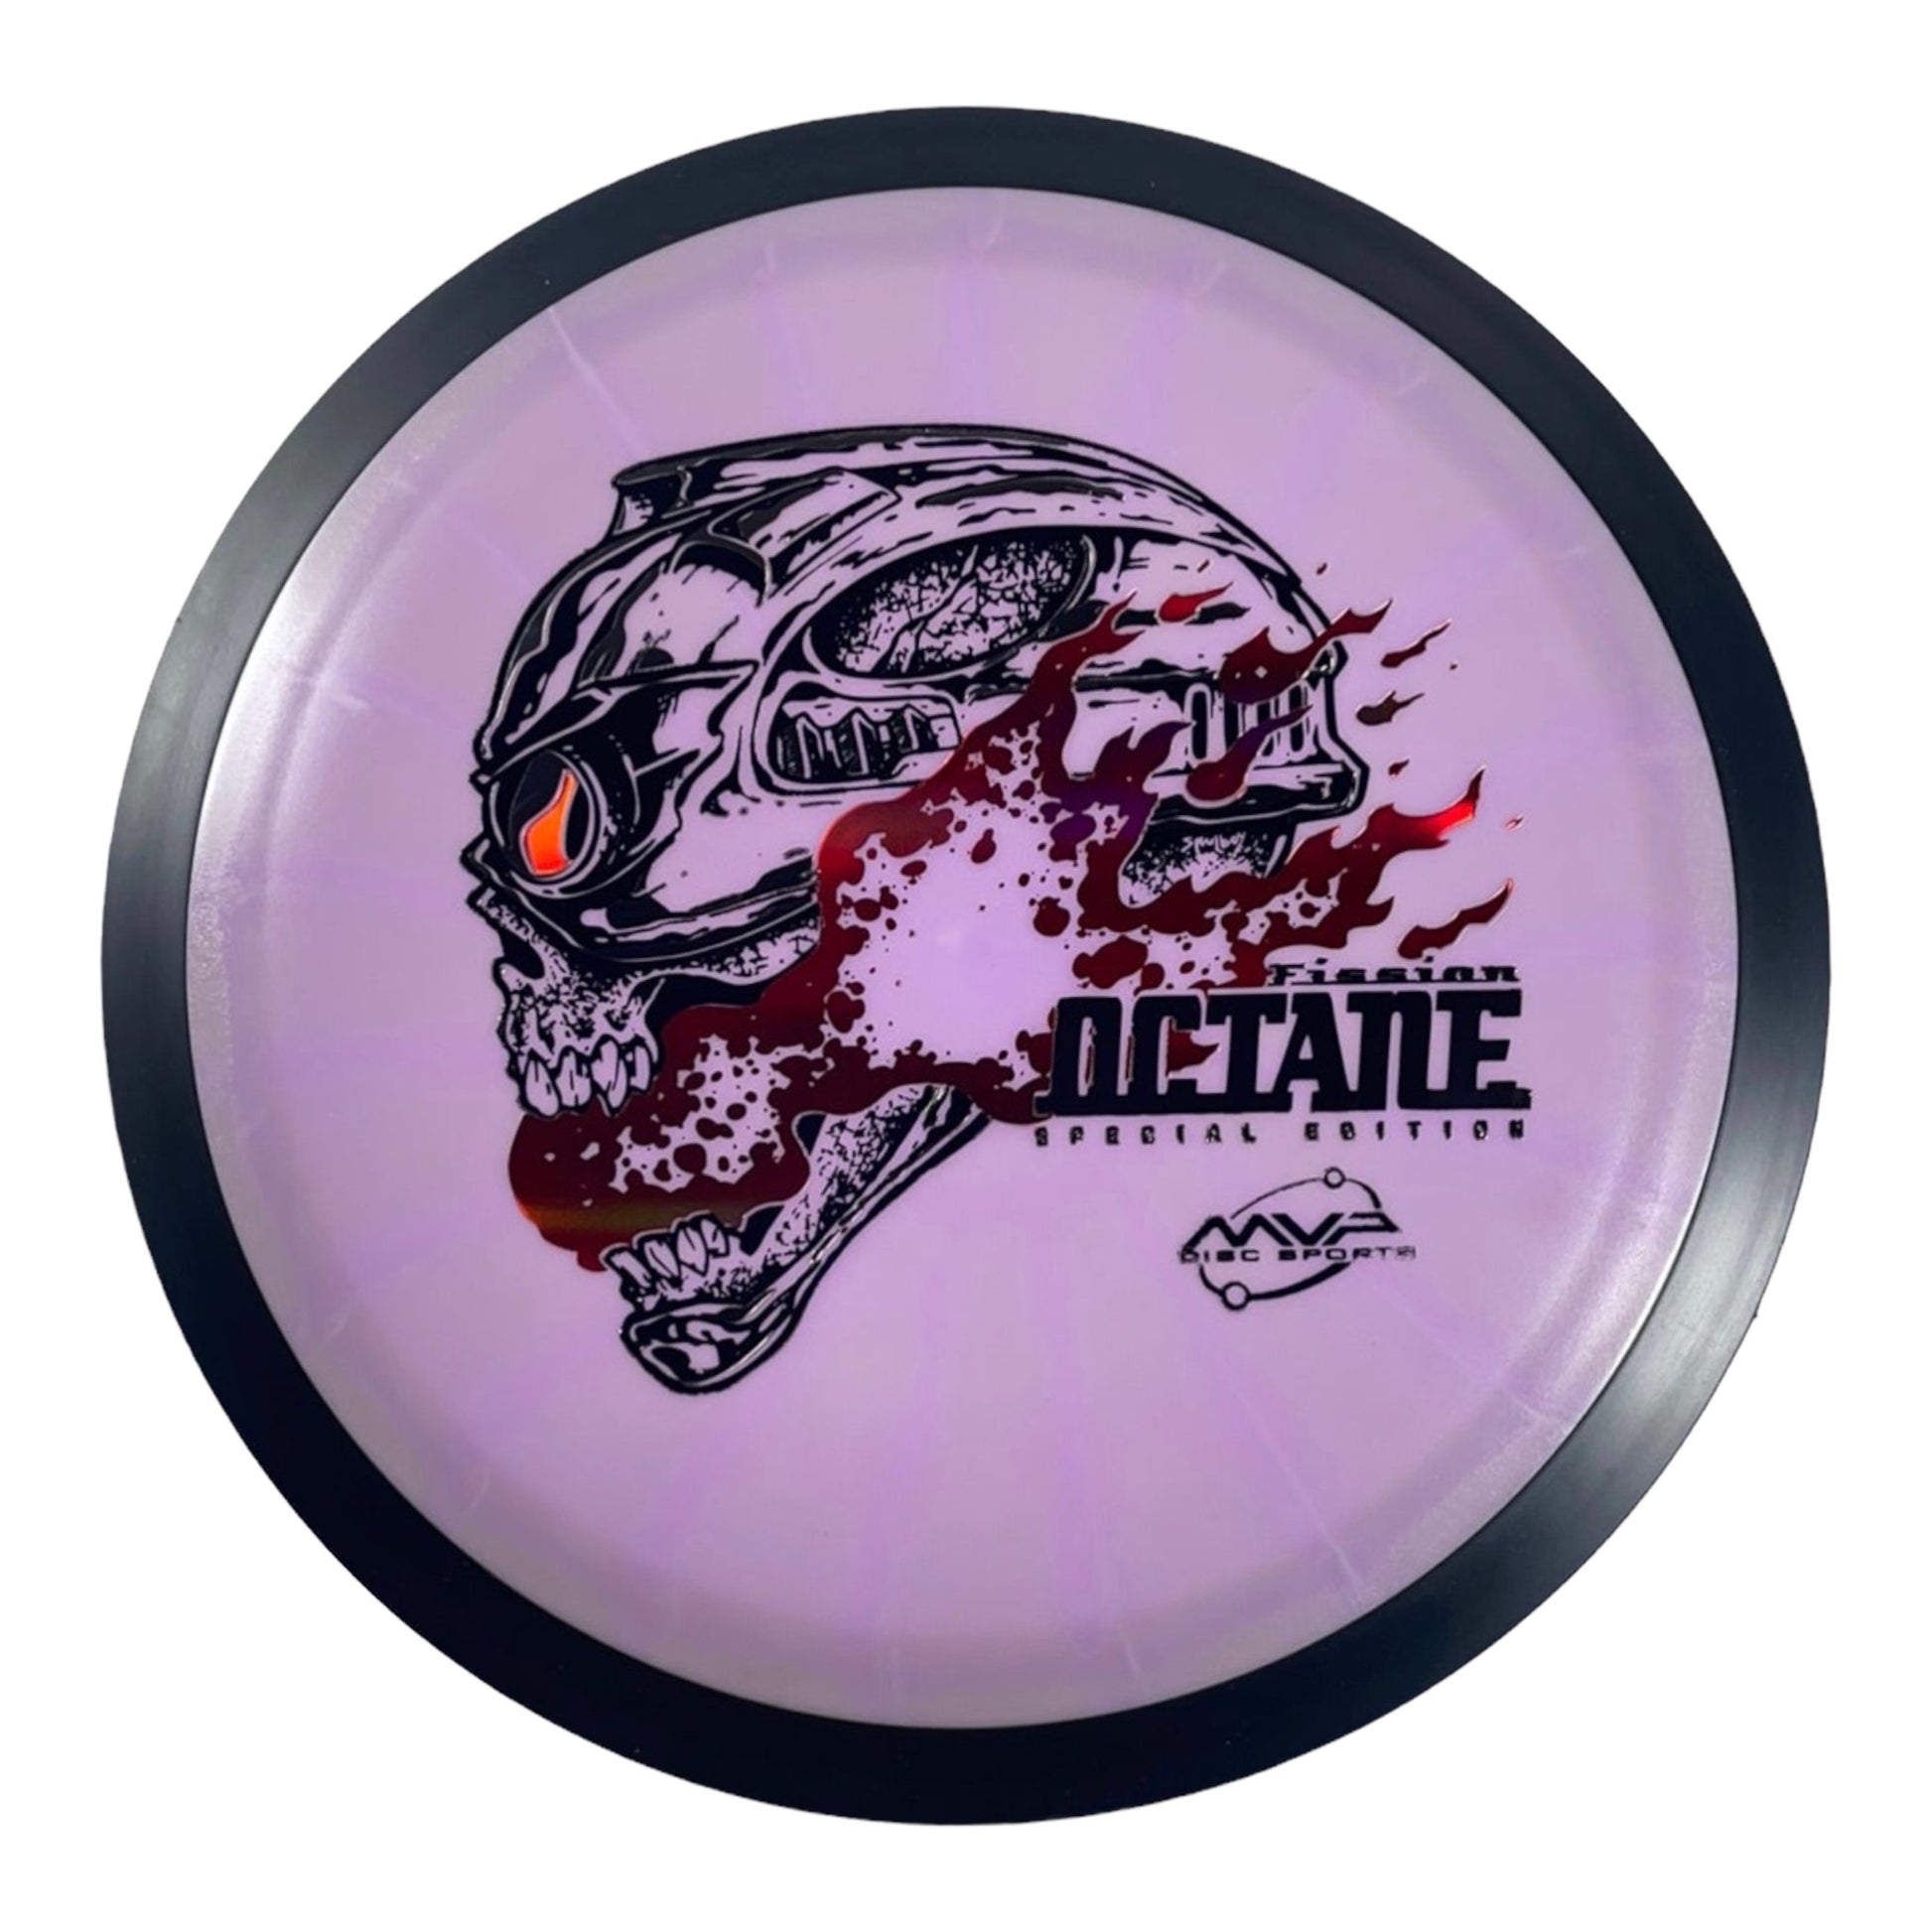 MVP Disc Sports Octane | Fission | Purple/Red 171g (Special Edition) Disc Golf